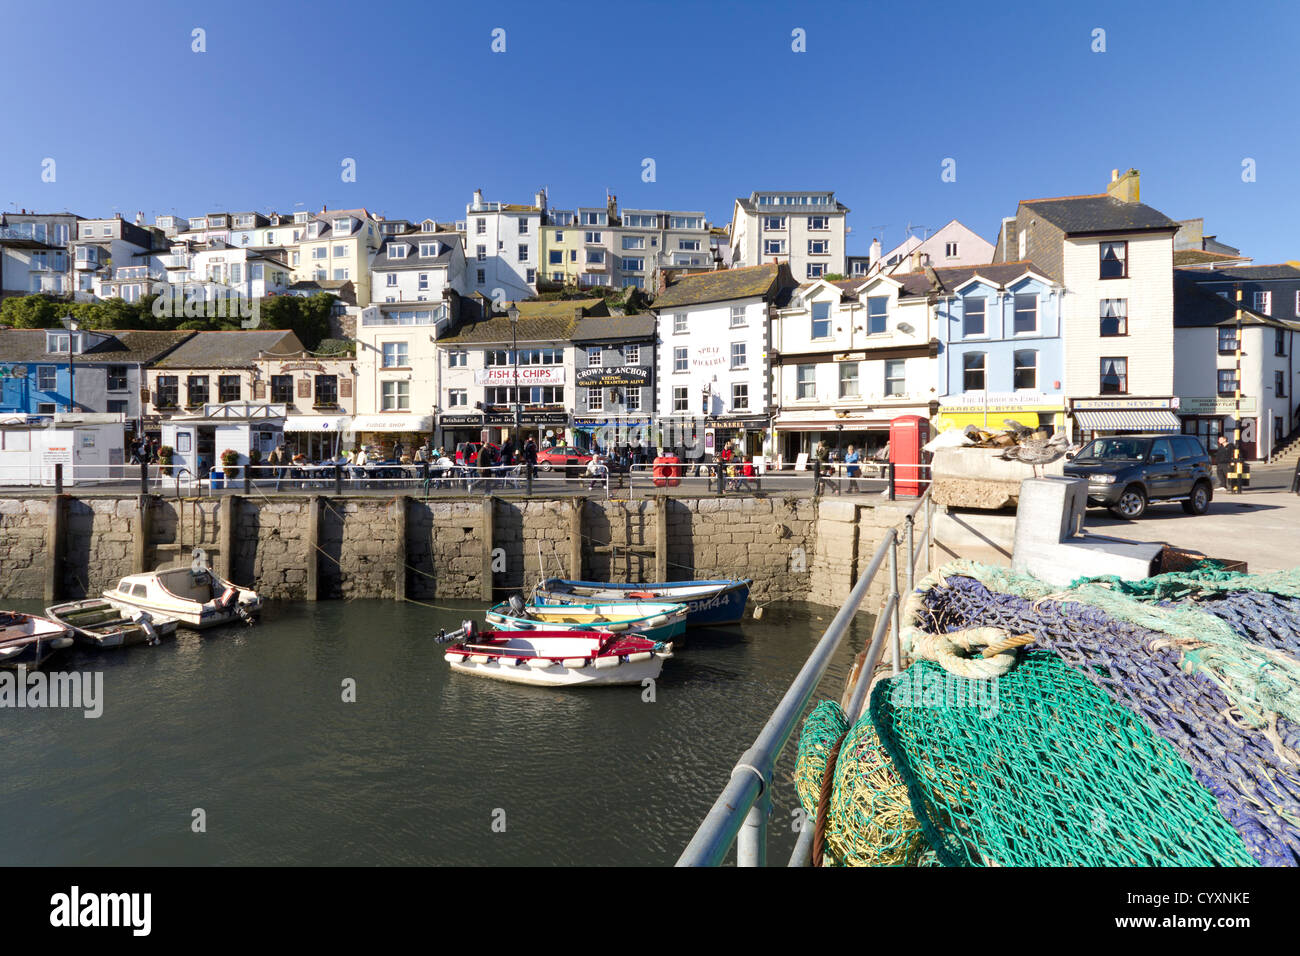 The two sides of Brixham in Devon, UK. Fishing nets lie on the quayside, next to small fishing boats and pleasure craft. Stock Photo